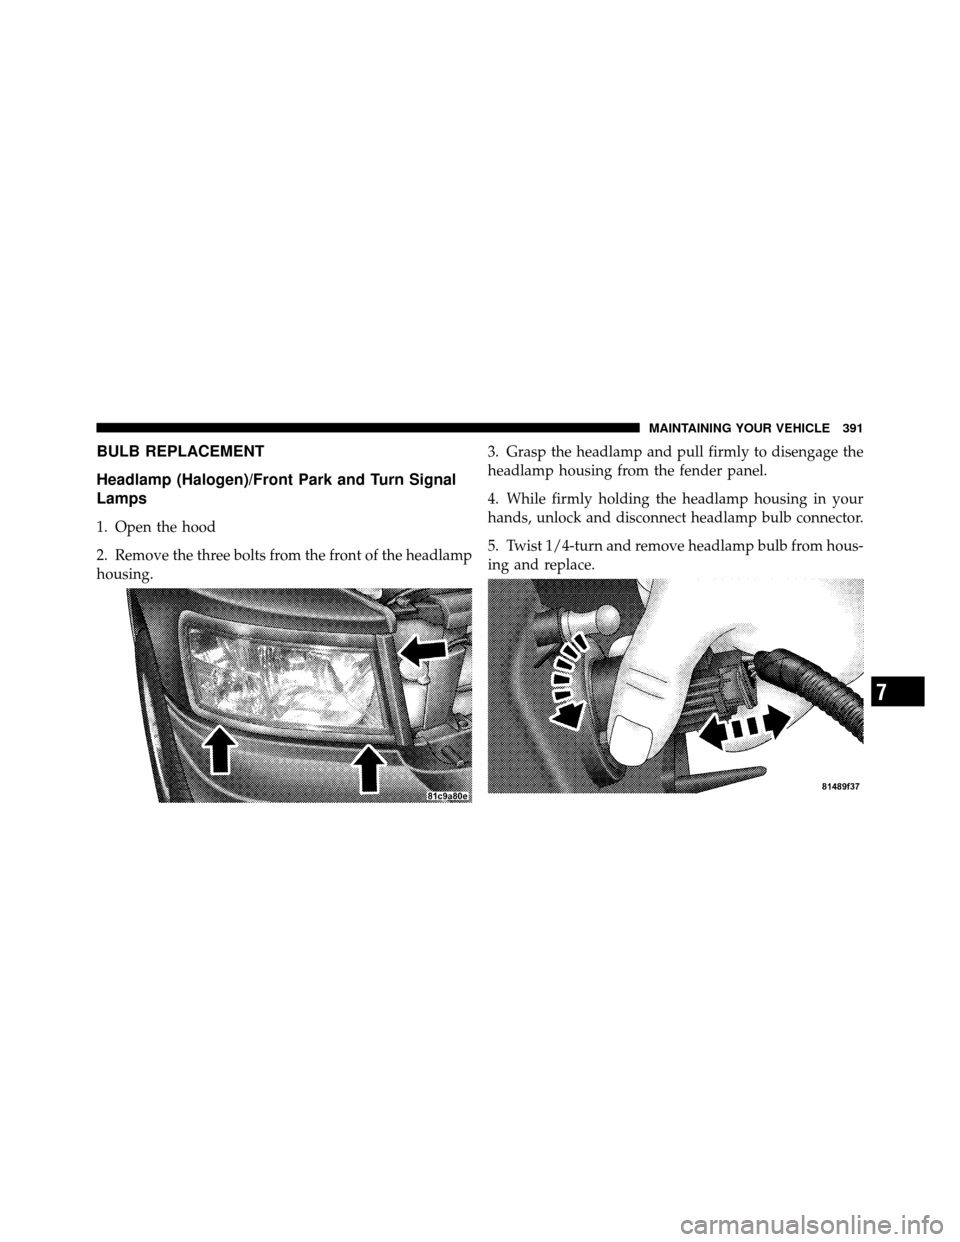 DODGE DAKOTA 2010 3.G Owners Manual BULB REPLACEMENT
Headlamp (Halogen)/Front Park and Turn Signal
Lamps
1. Open the hood
2. Remove the three bolts from the front of the headlamp
housing.3. Grasp the headlamp and pull firmly to disengag